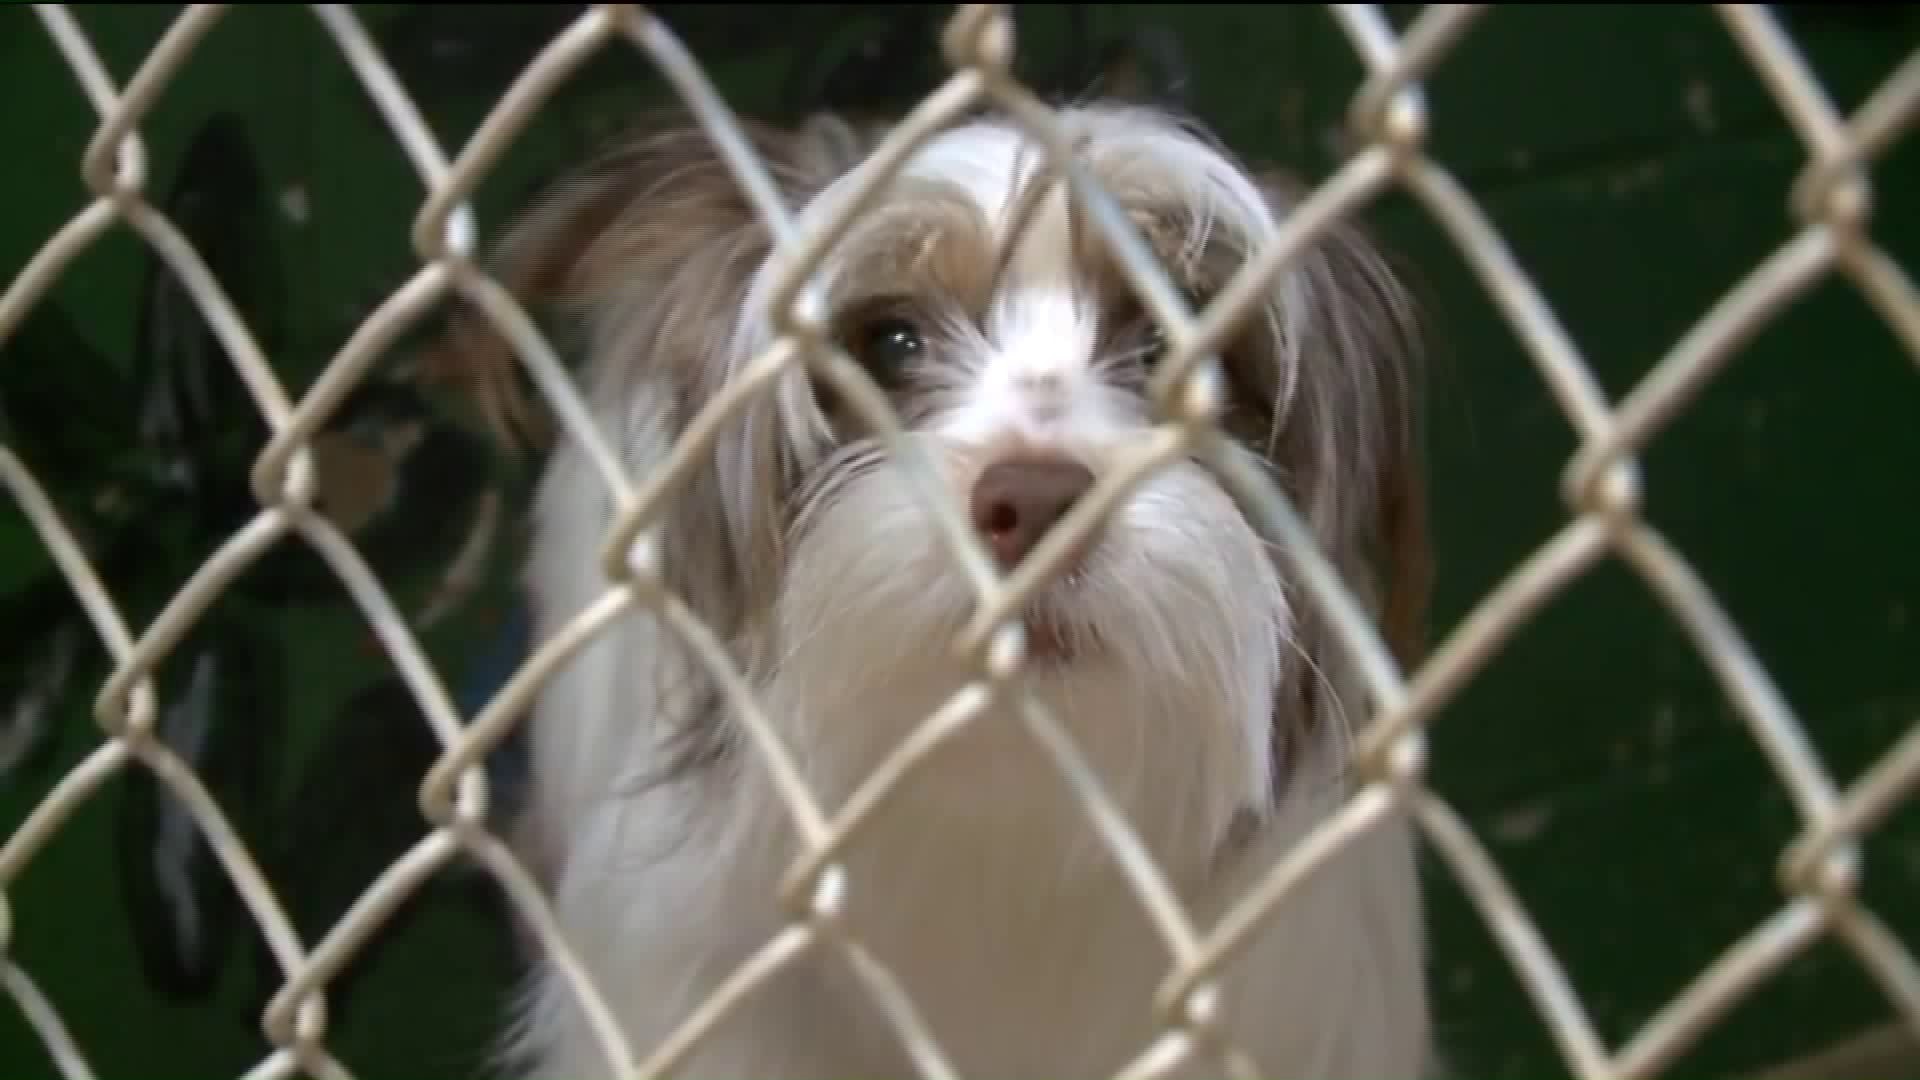 Branford animal shelter offers alternative to getting rid of your pet